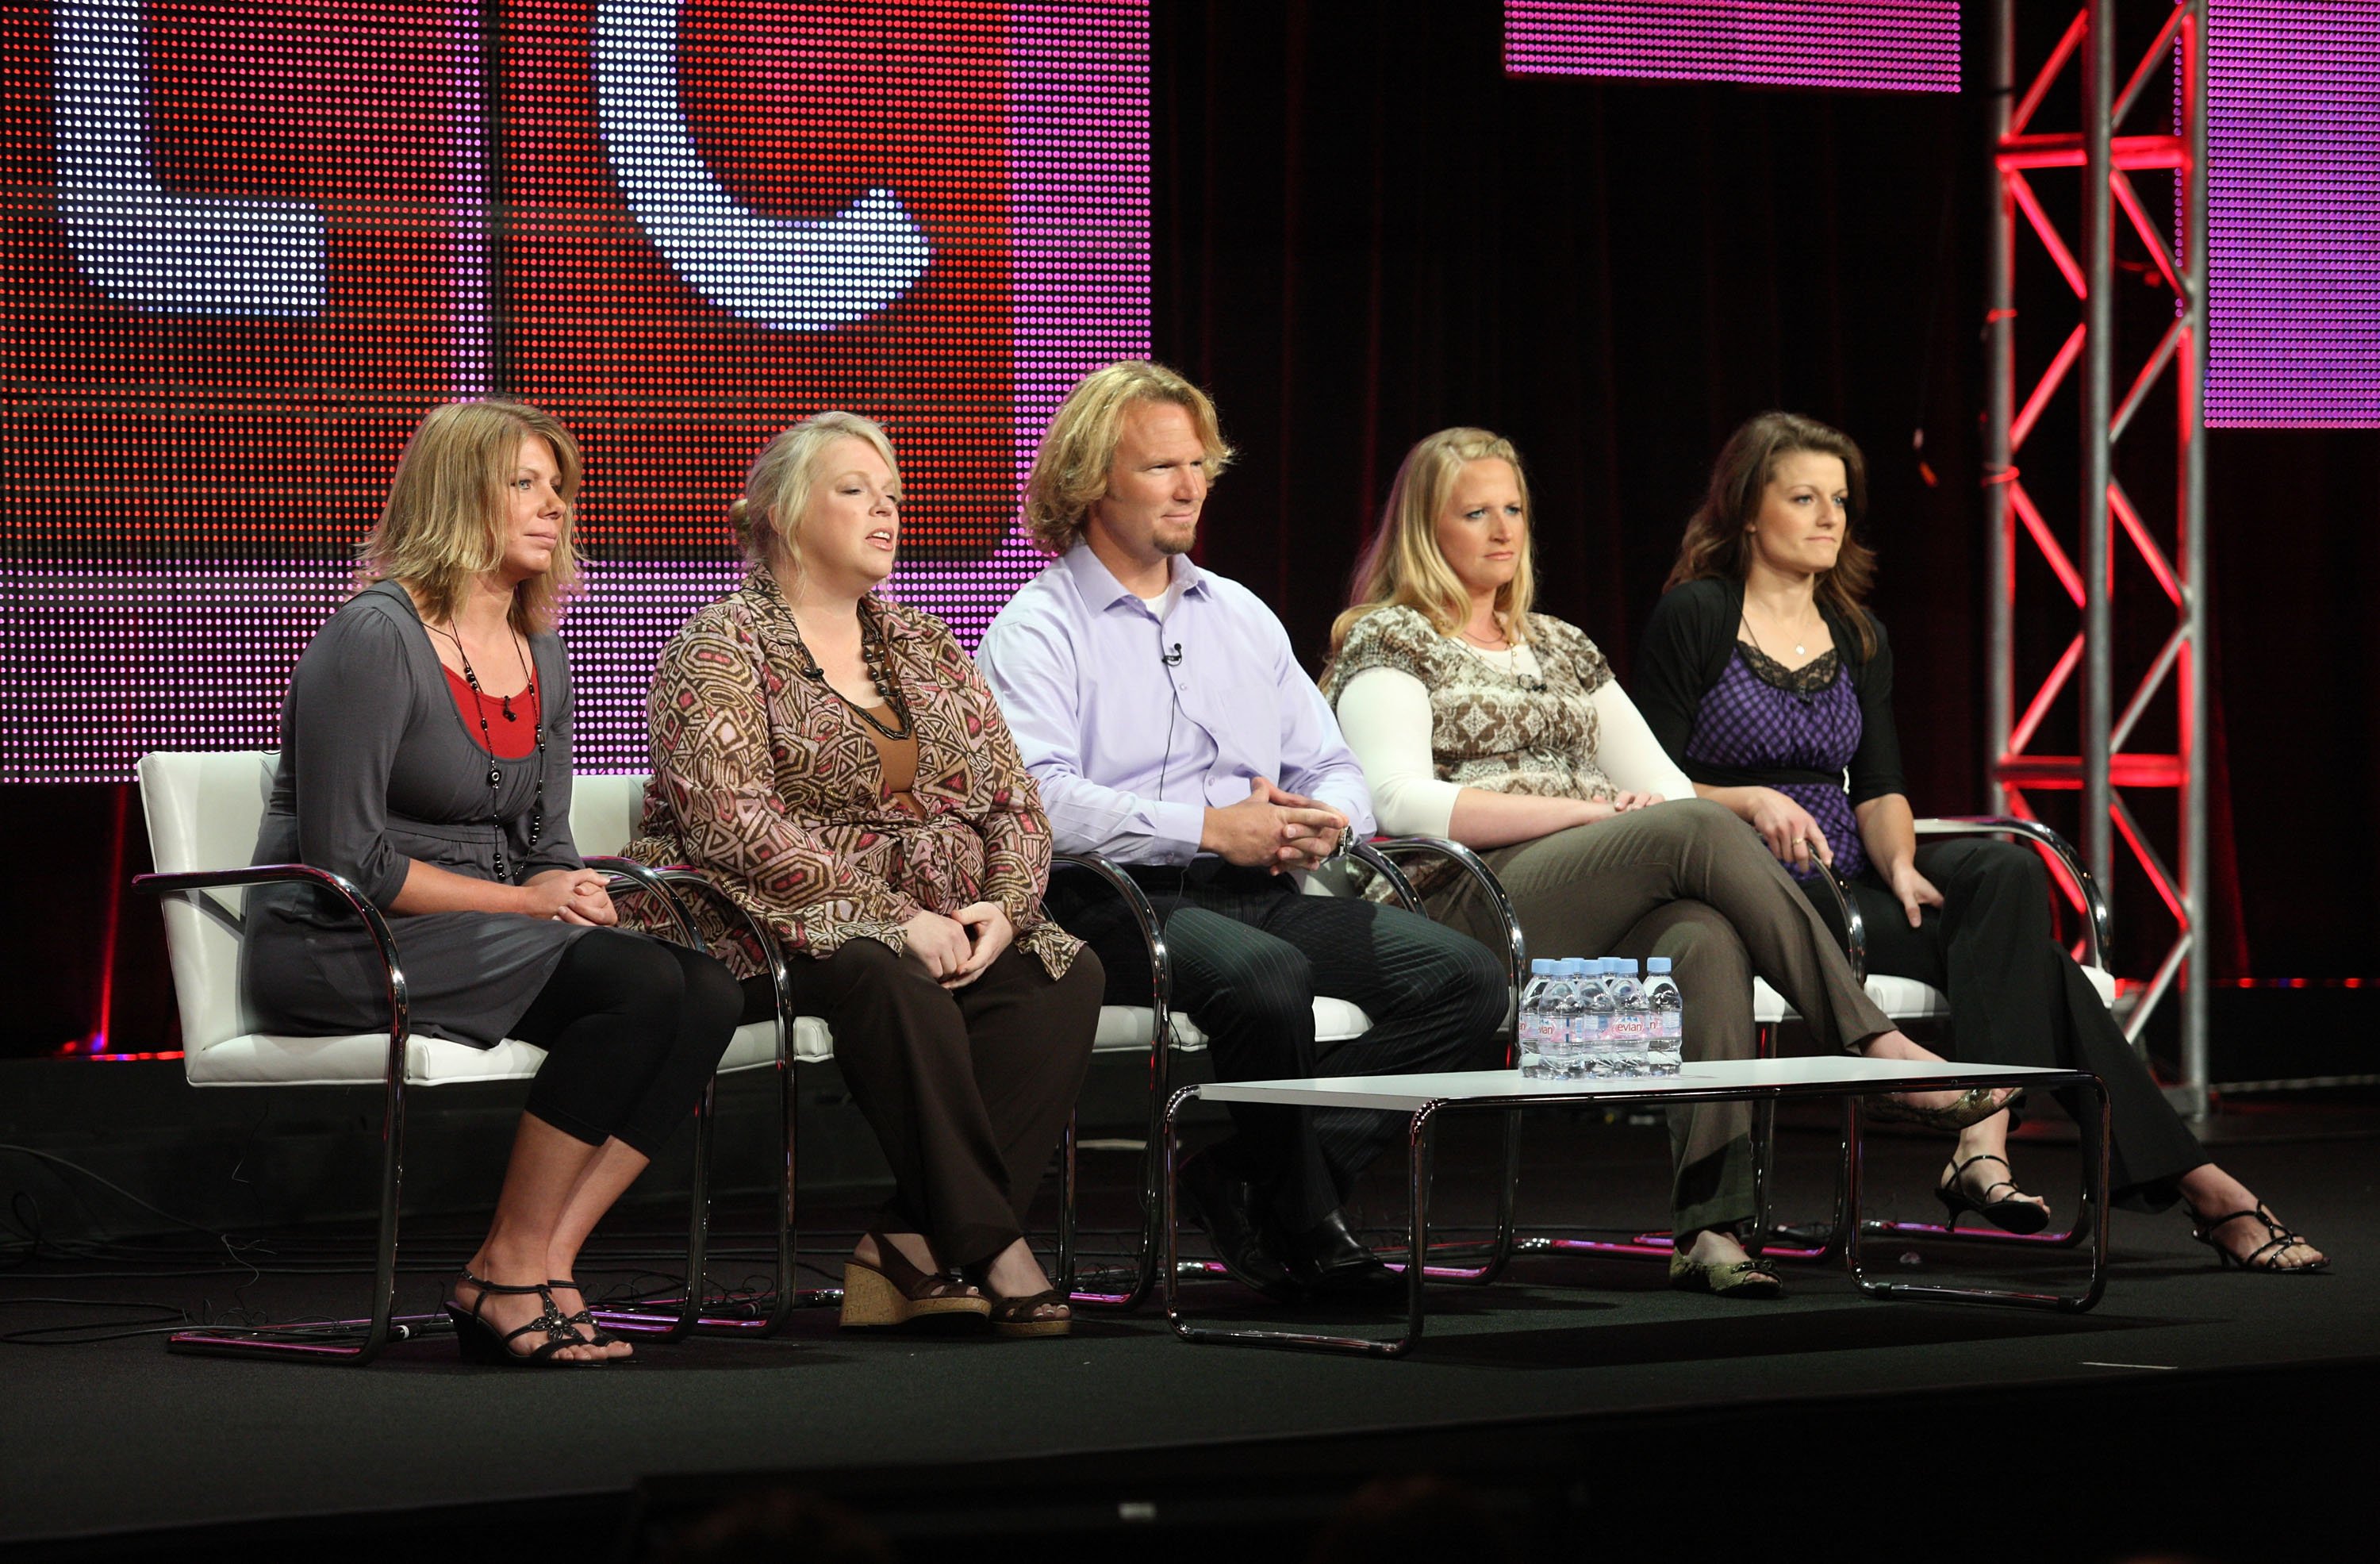 Meri Brown, Janelle Brown, Kody Brown, Christine Brown and Robyn Brown appear at a press tour to promote 'Sister Wives' in 2010